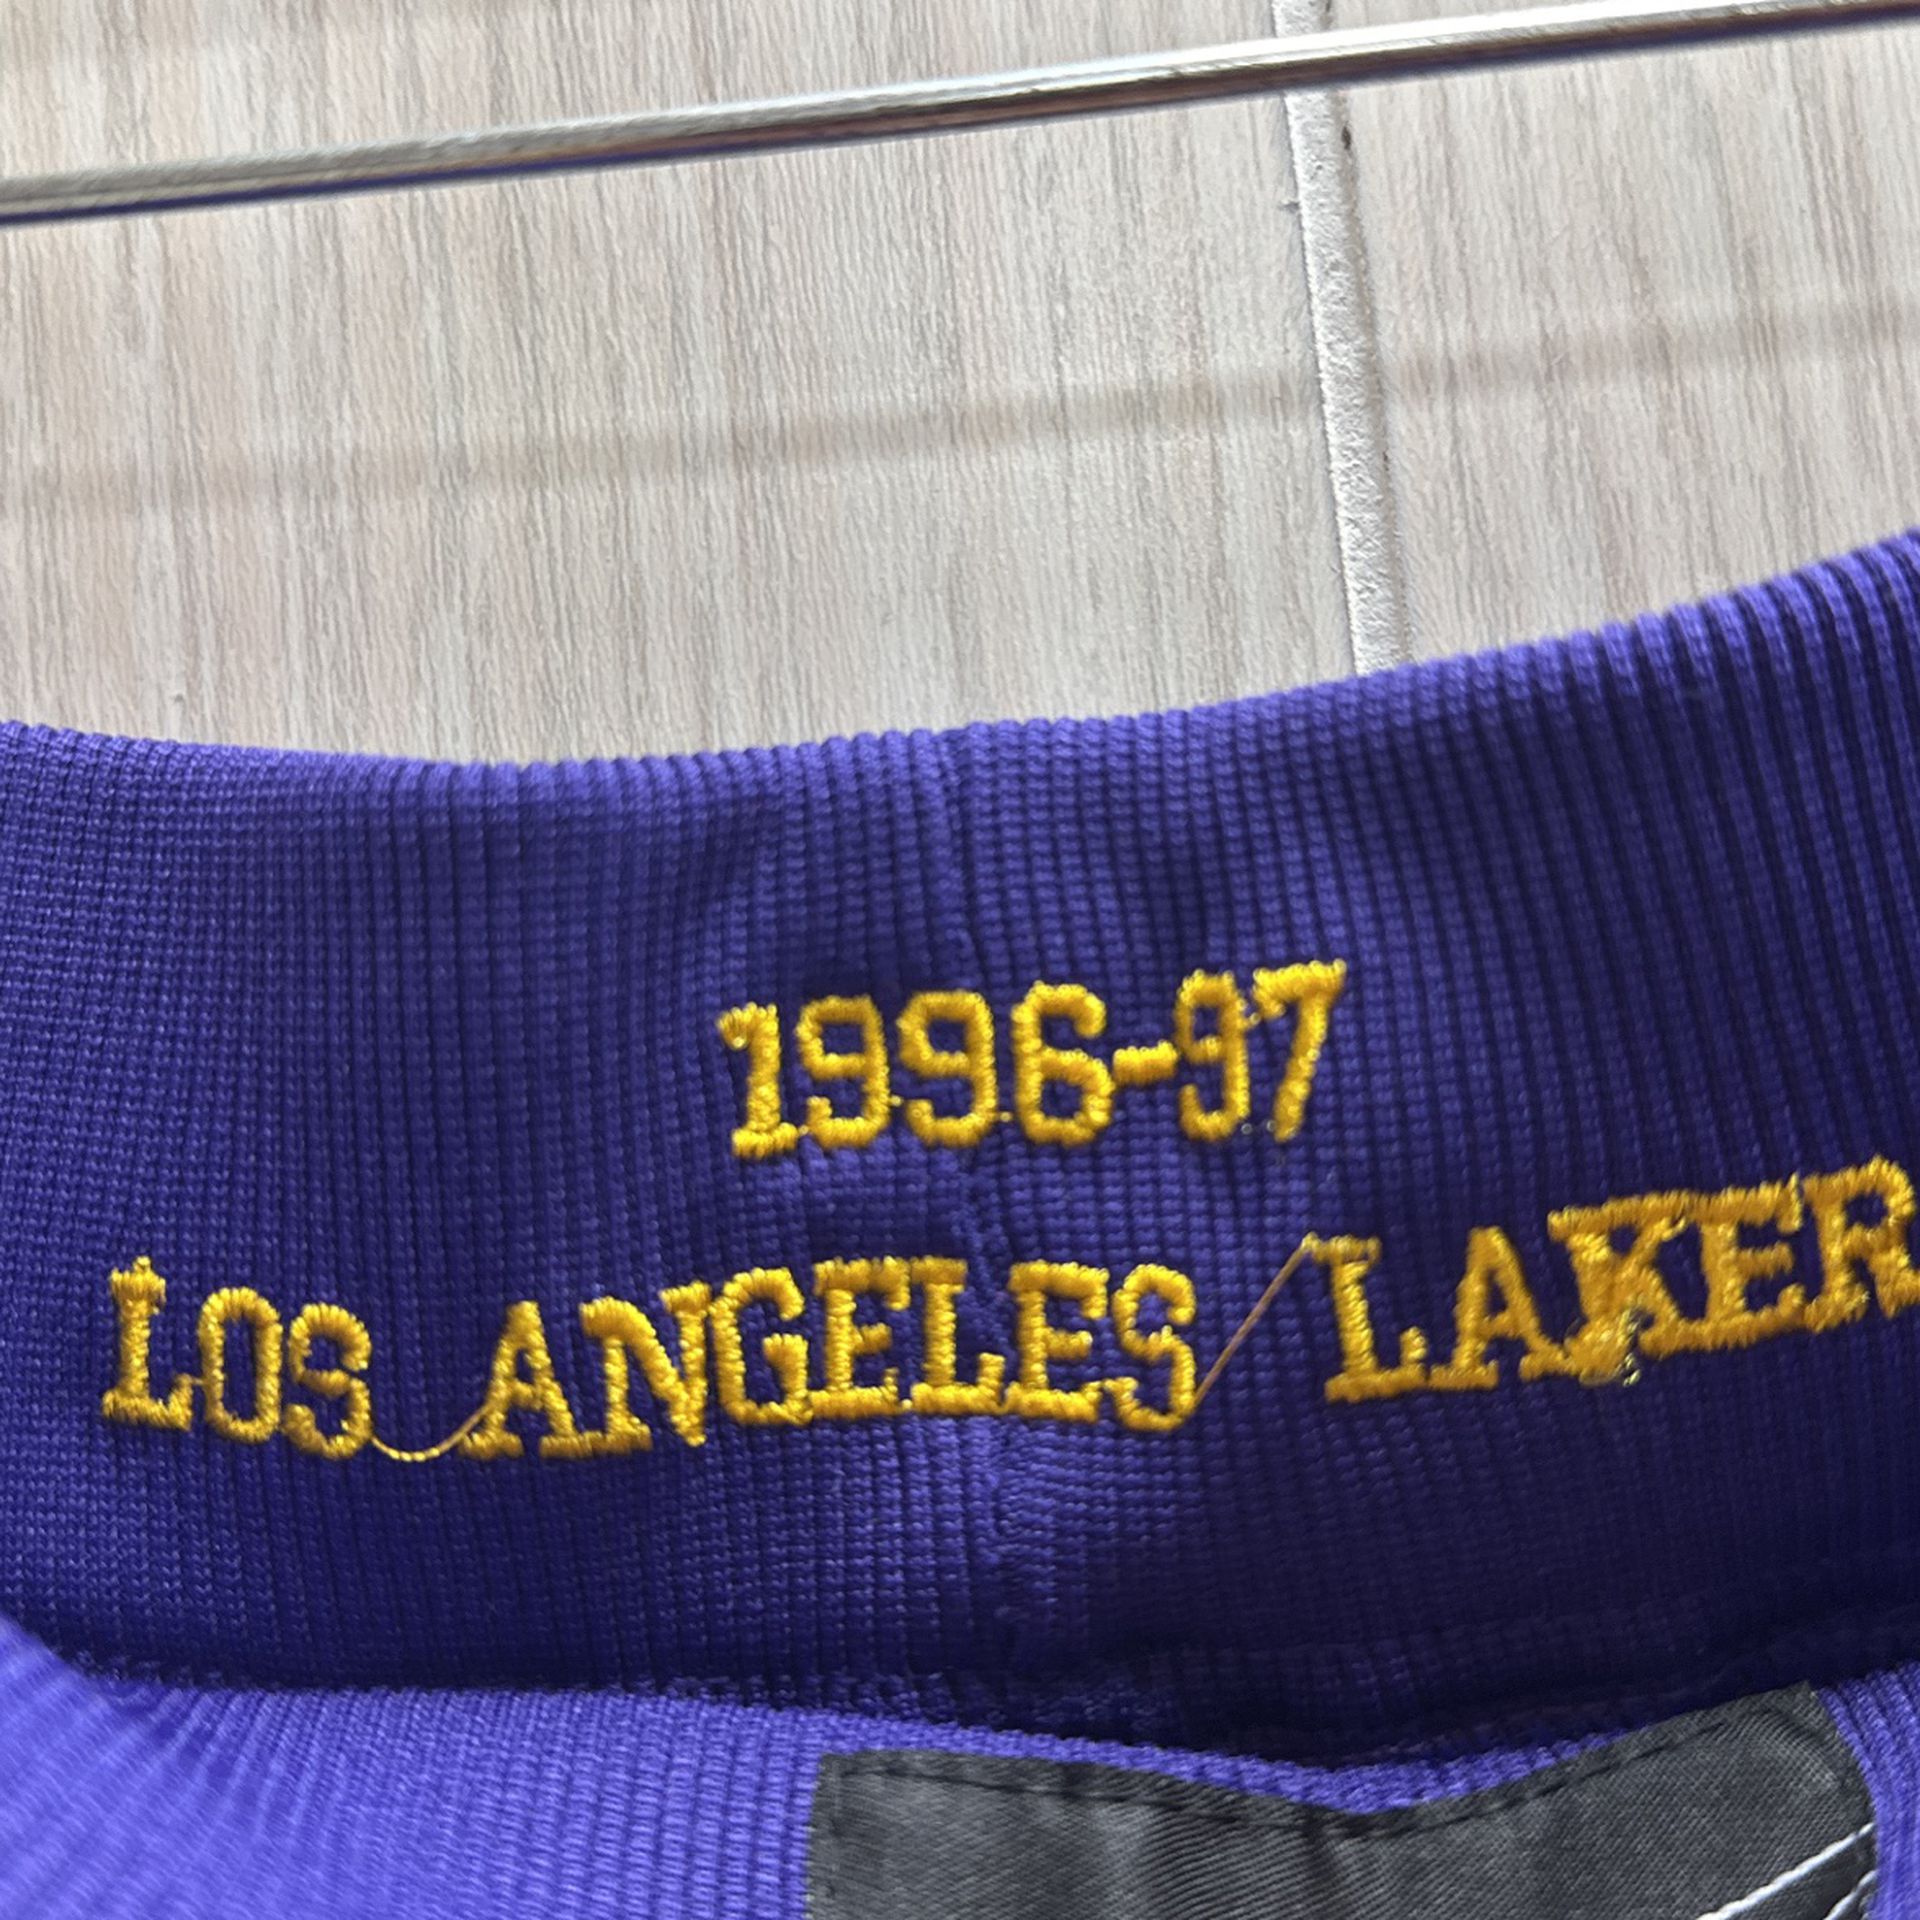 Lakers Just Don Shorts Size Small- Large for Sale in West Palm Beach, FL -  OfferUp